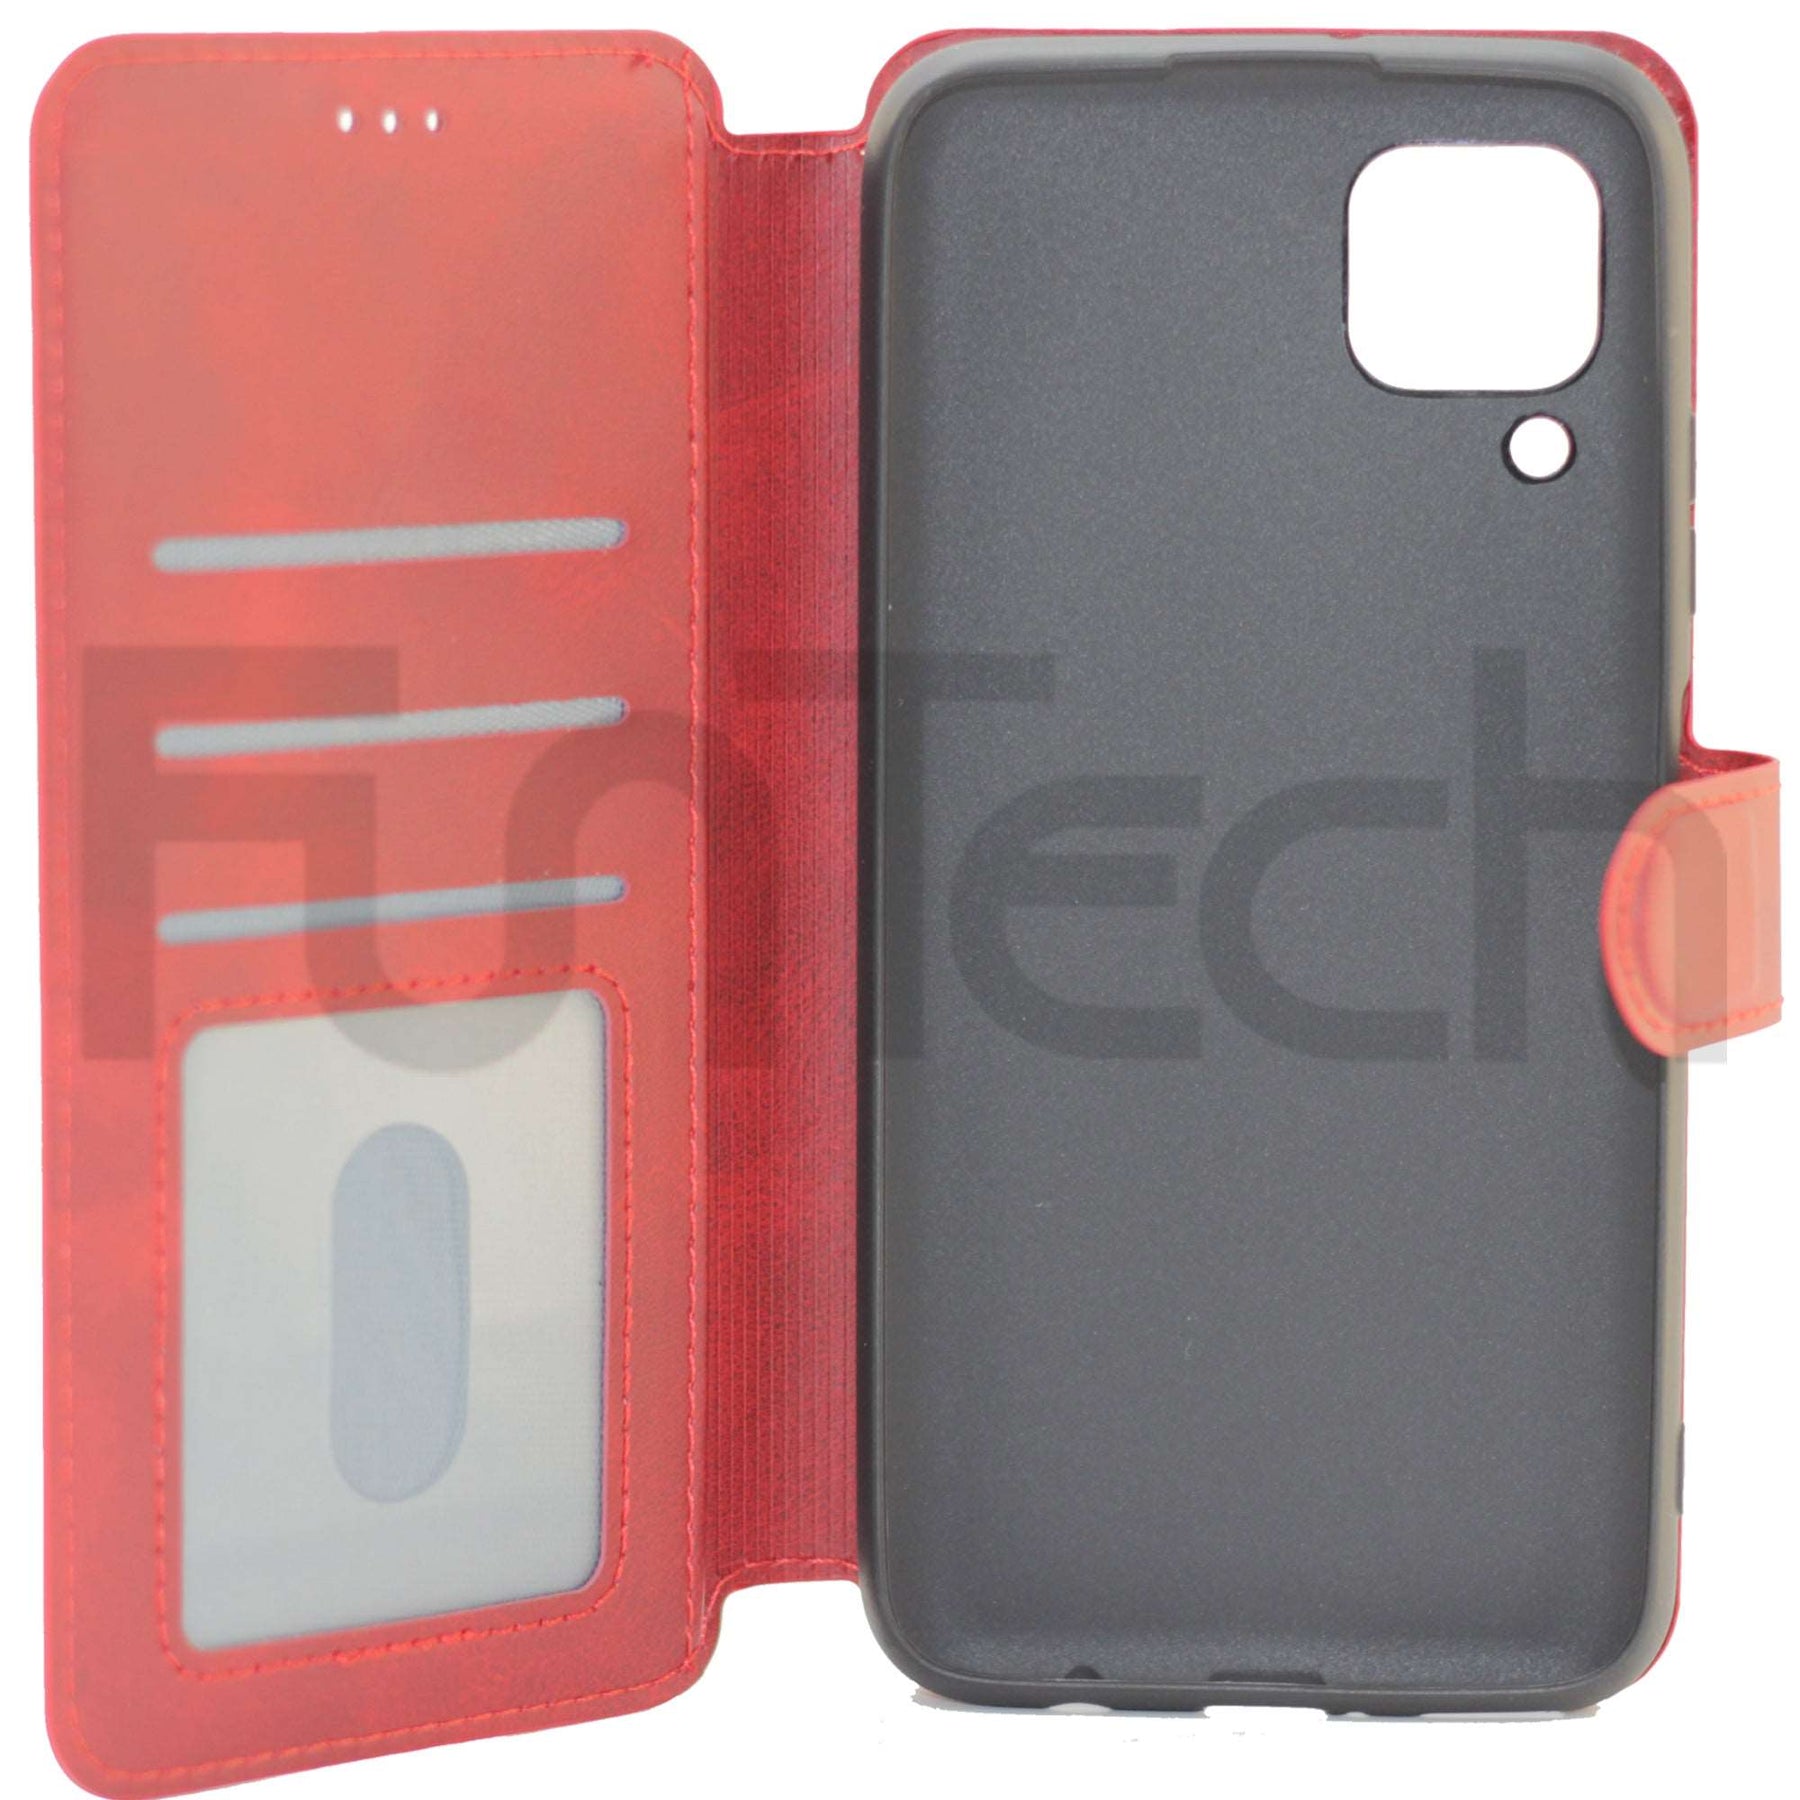 Huawei P40 Lite, Leather Wallet Case, Color Red,